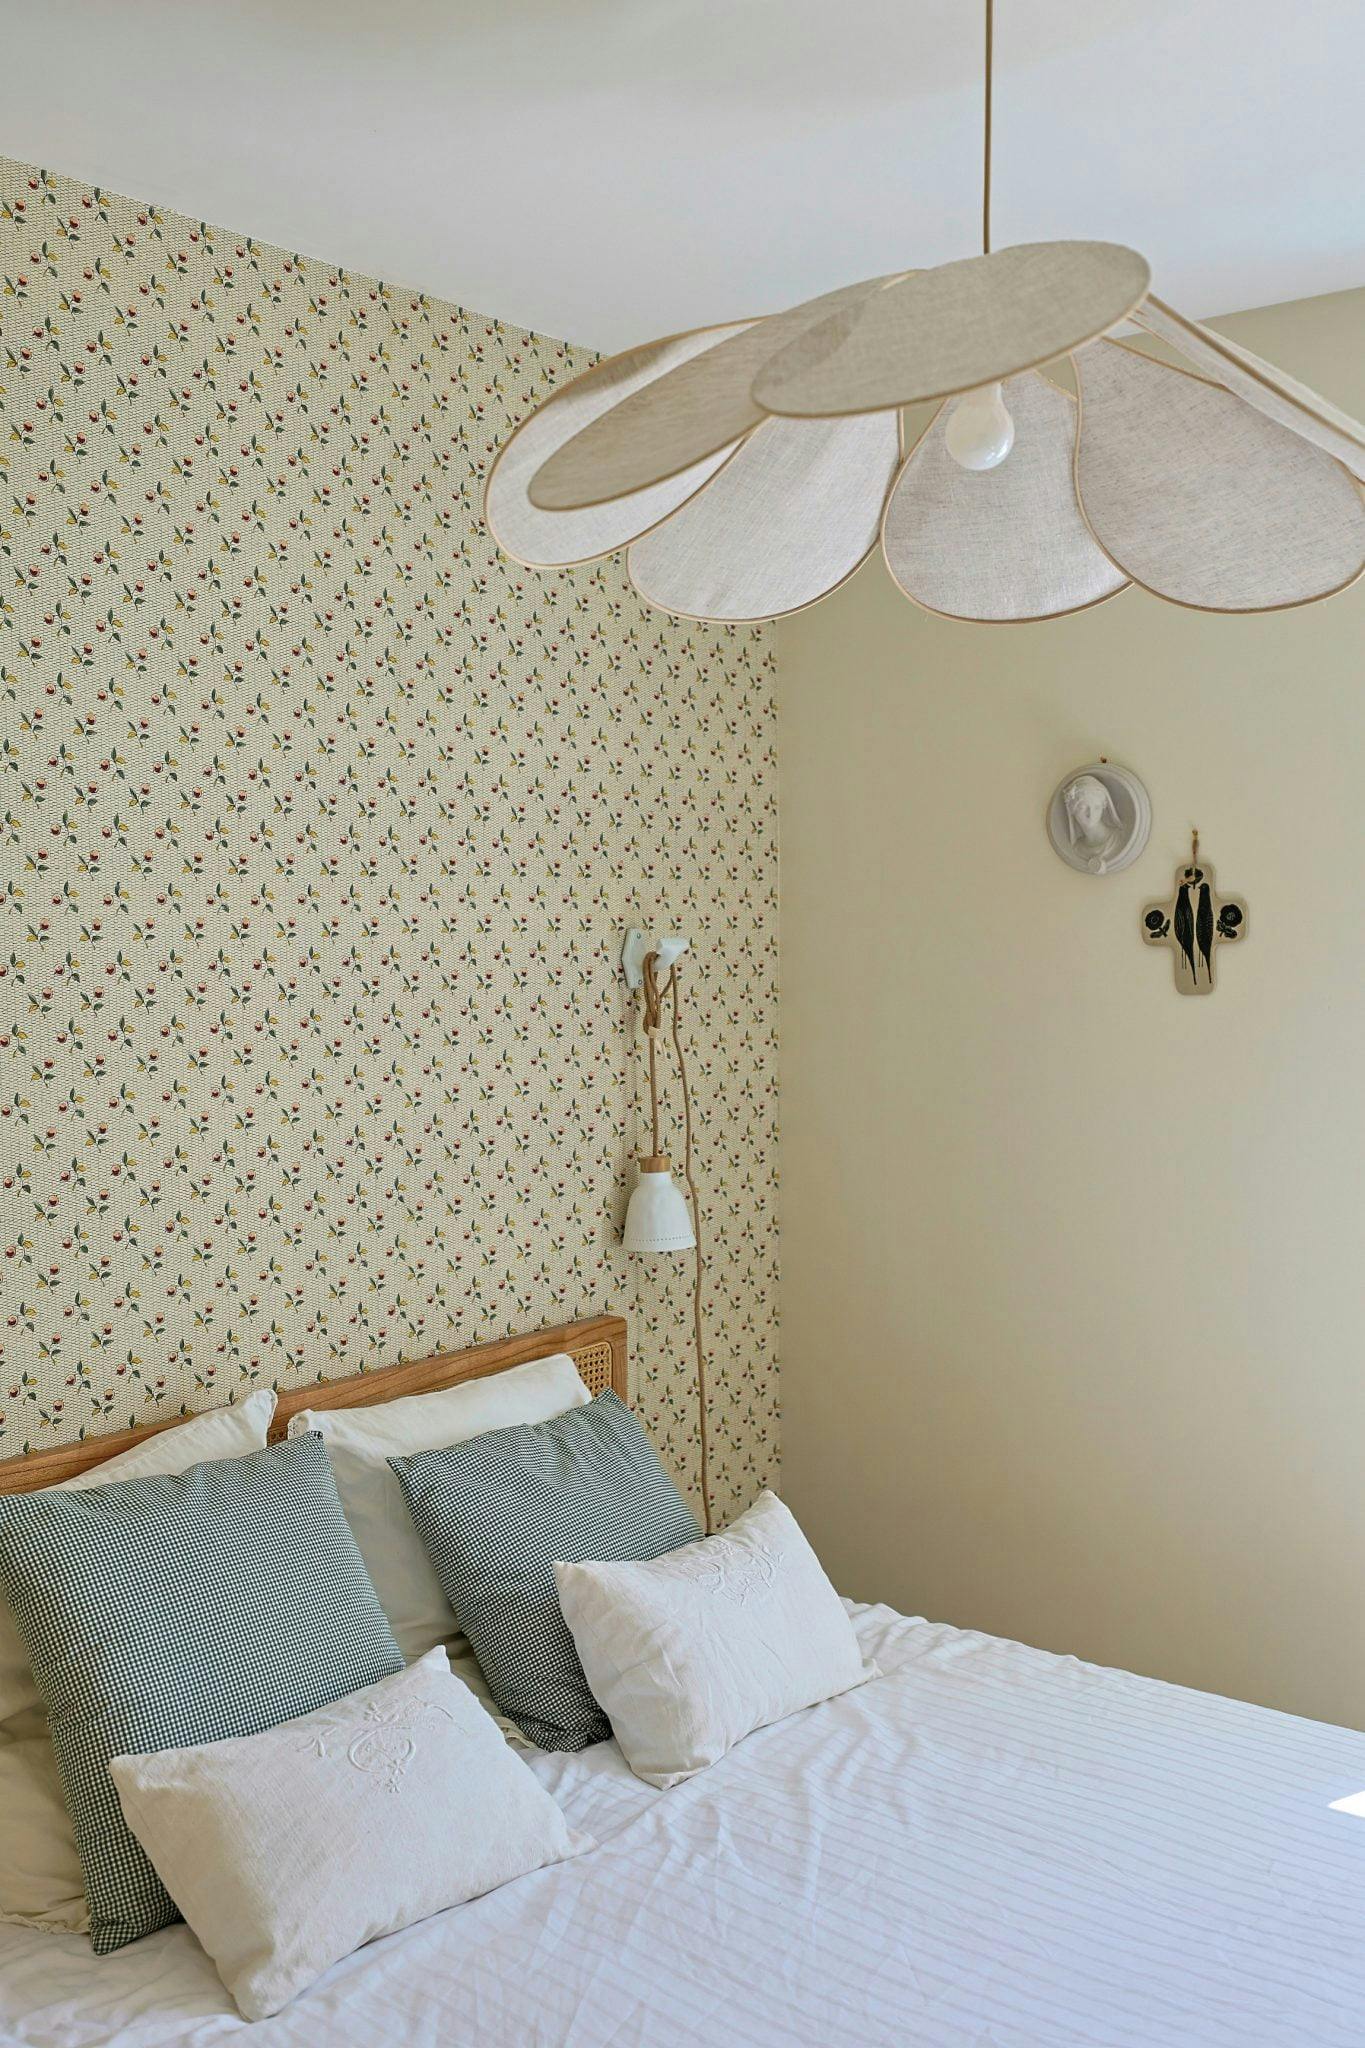 Bed and bedroom walls covered with floral wallpaper